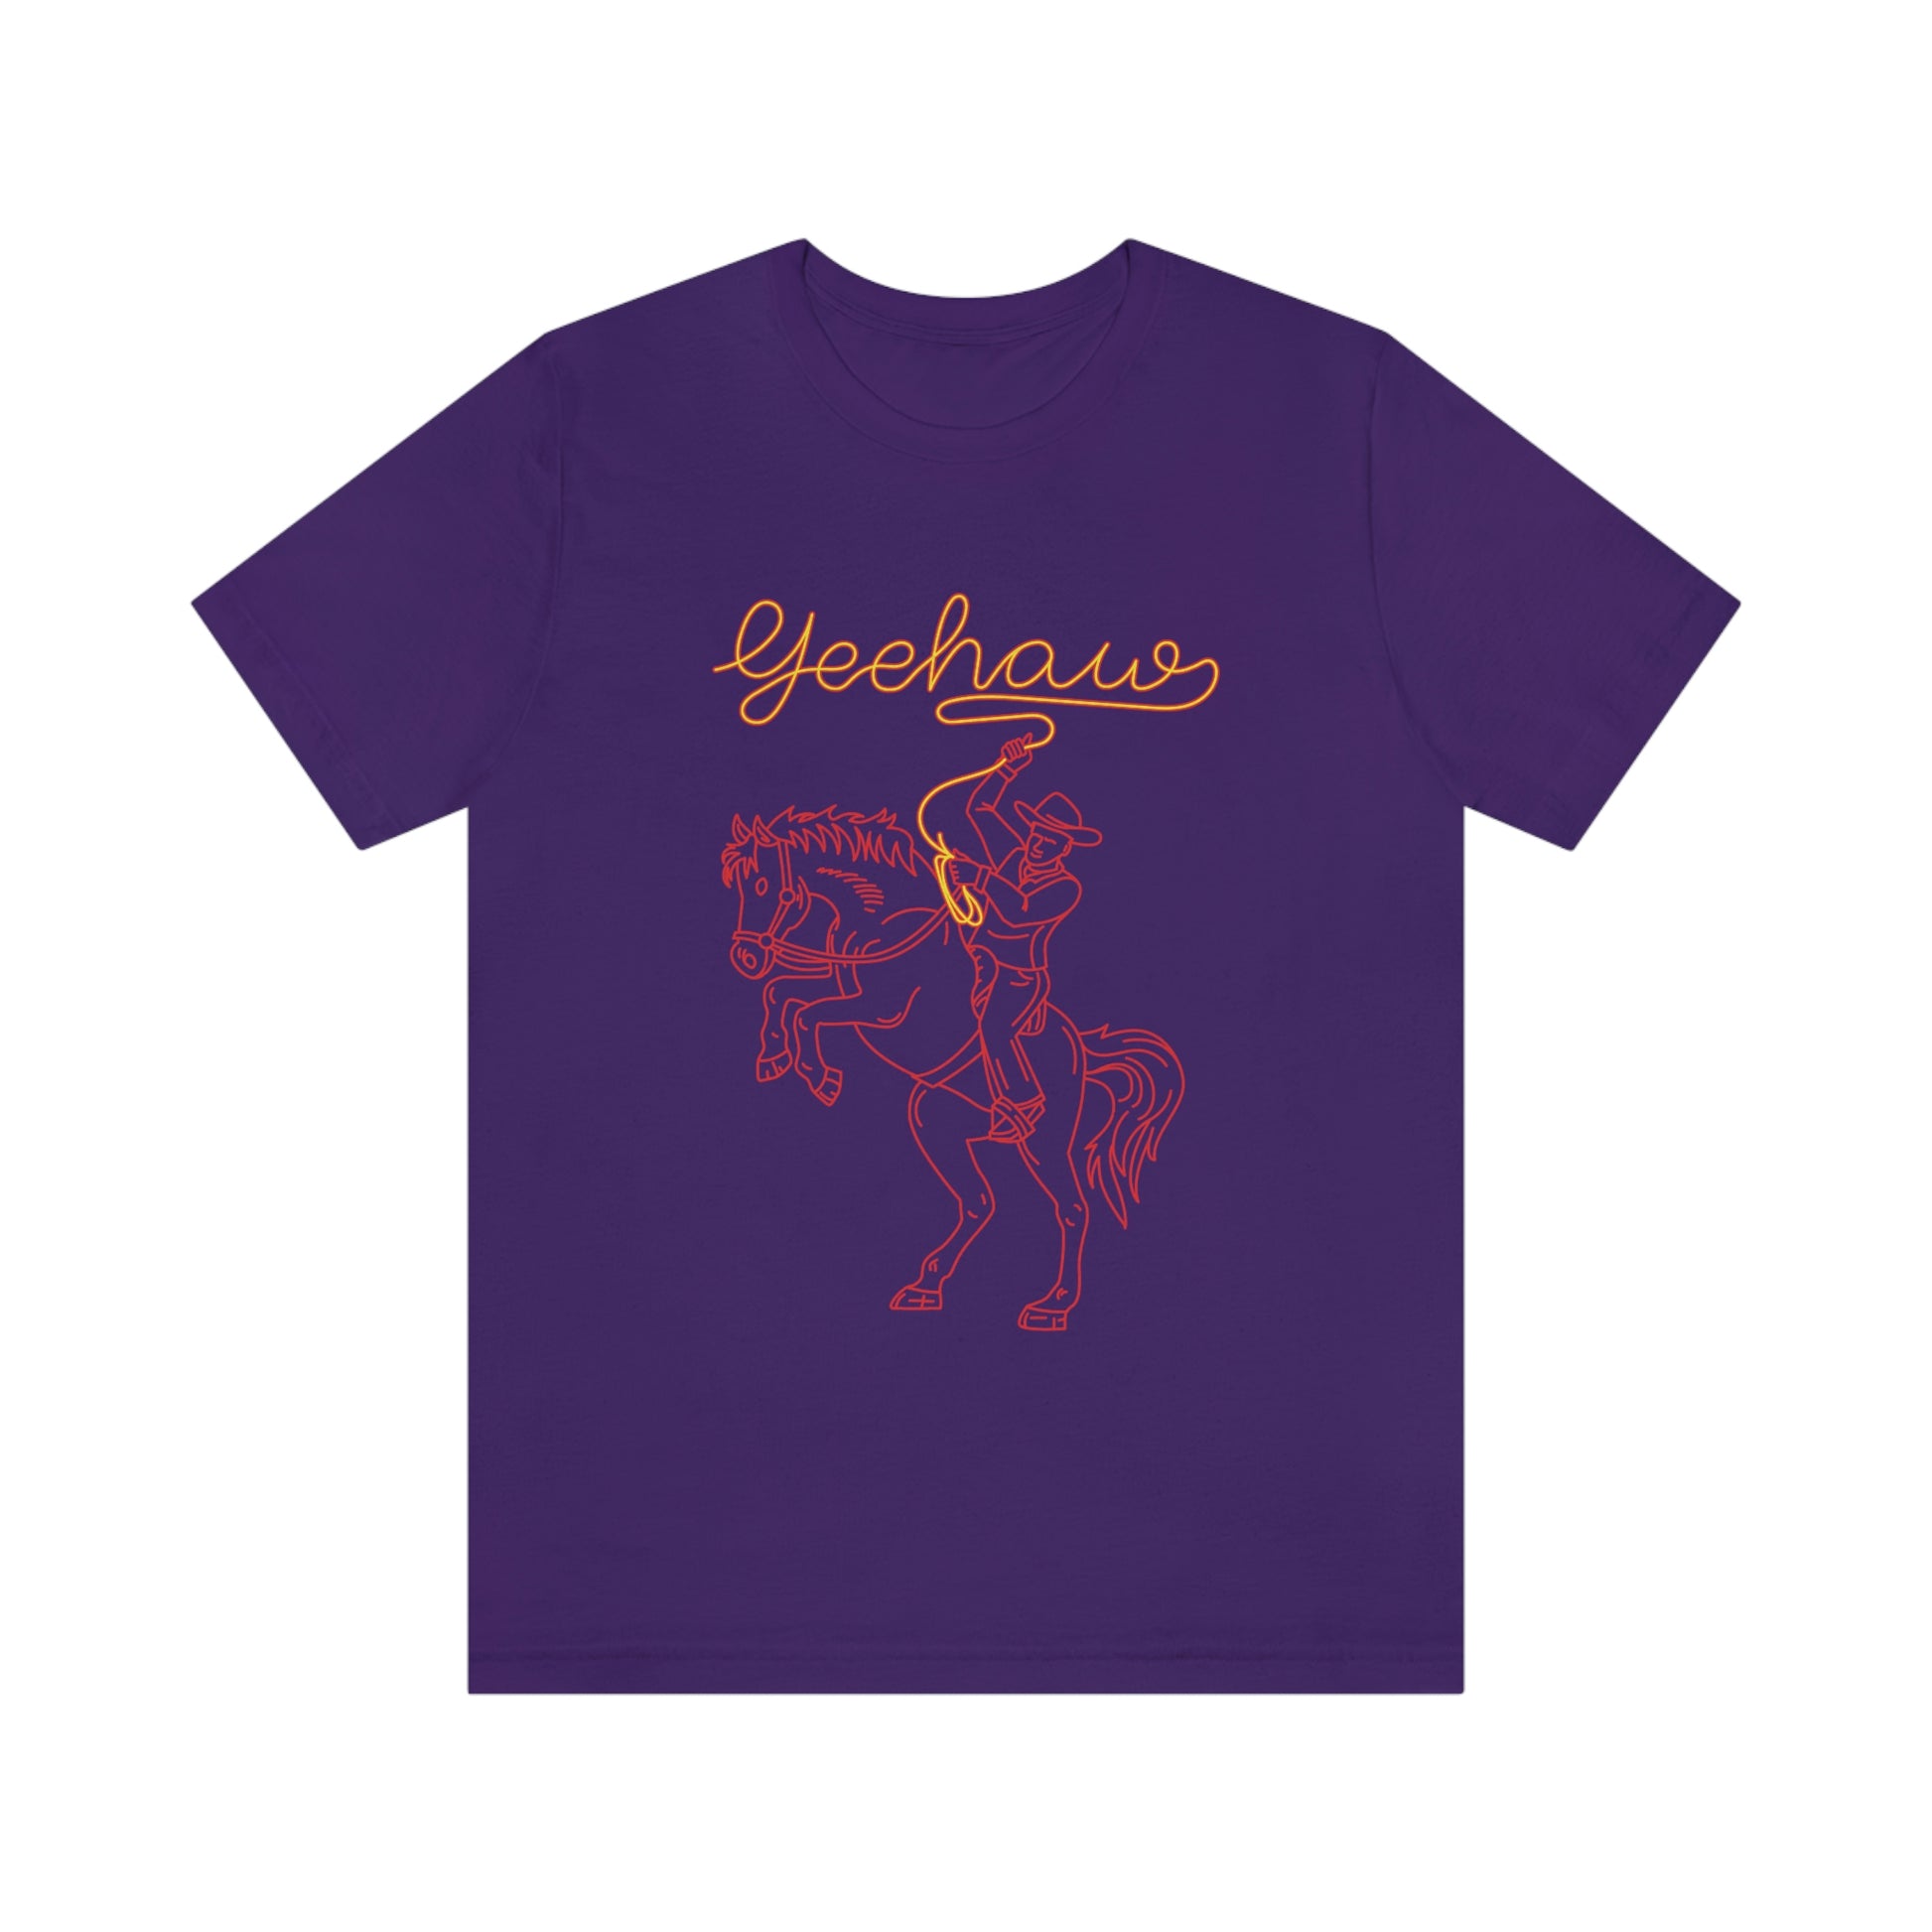 Purple T-Shirt featuring a neon design of a cowboy with a lasso saying 'yeehaw' in yellow and red, from the TEQNEON Word Craft collection